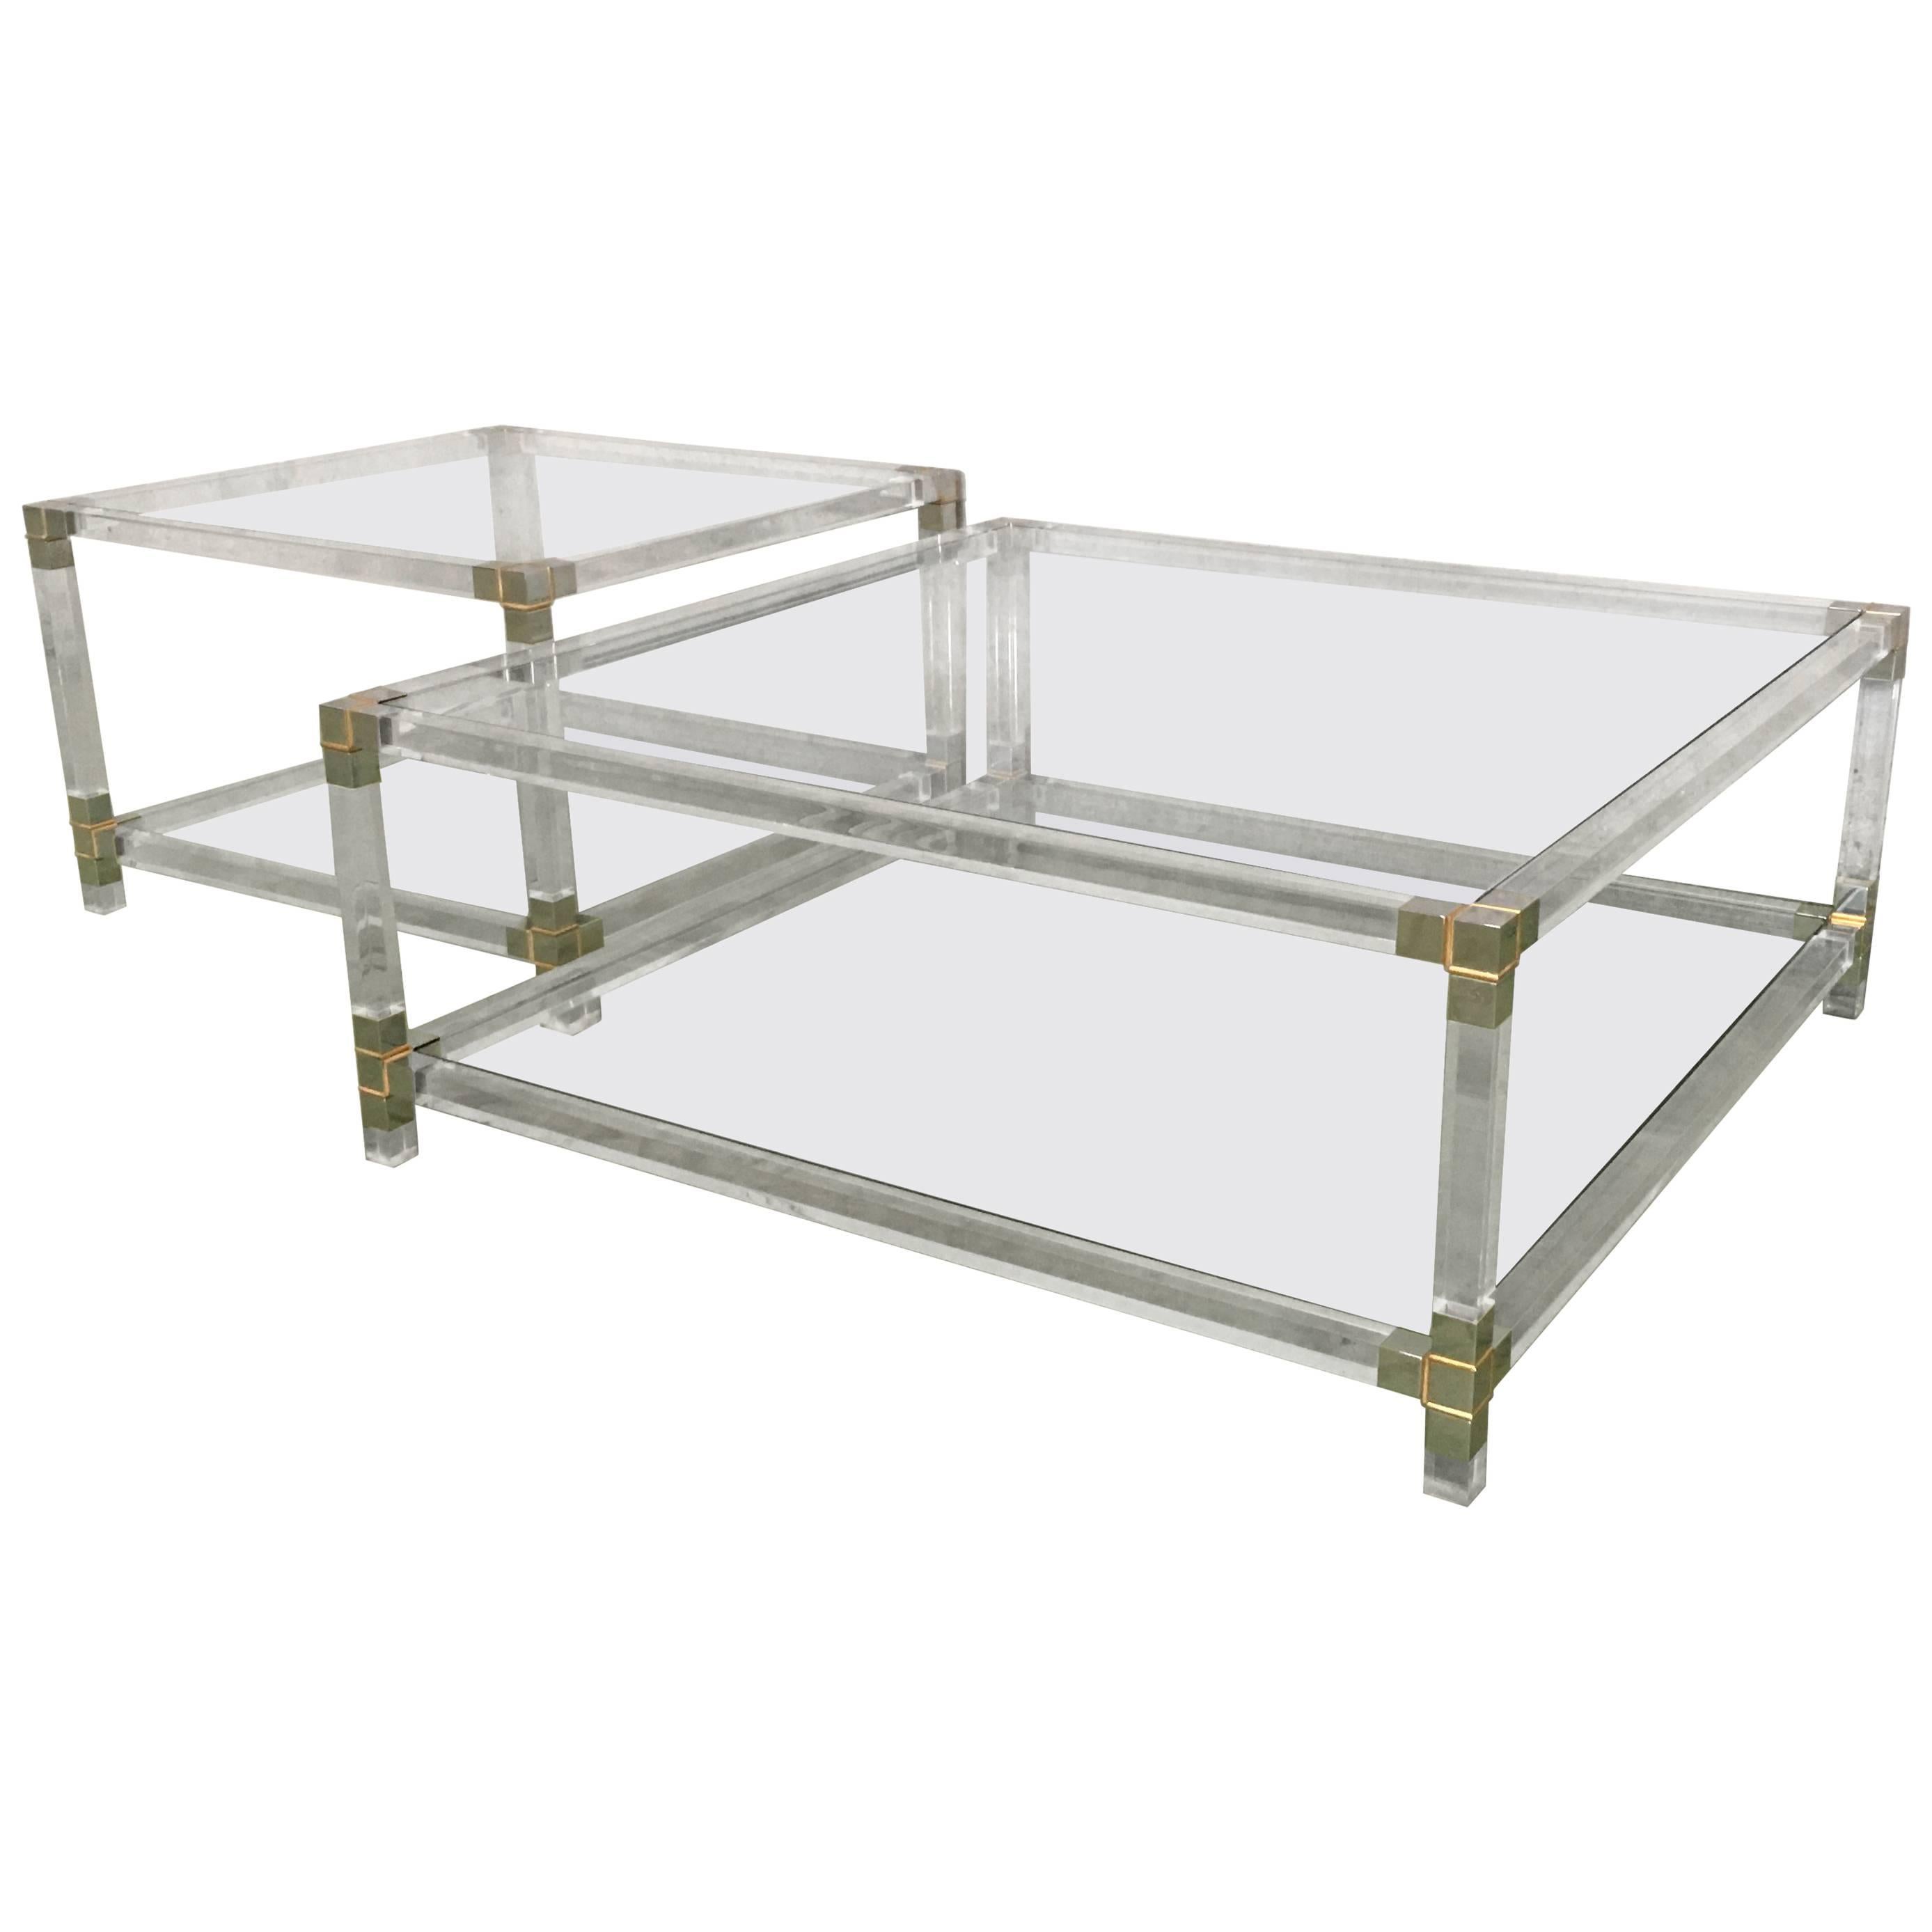 Pair of Midcentury Square Lucite Coffee Tables with Chromed Metal Details